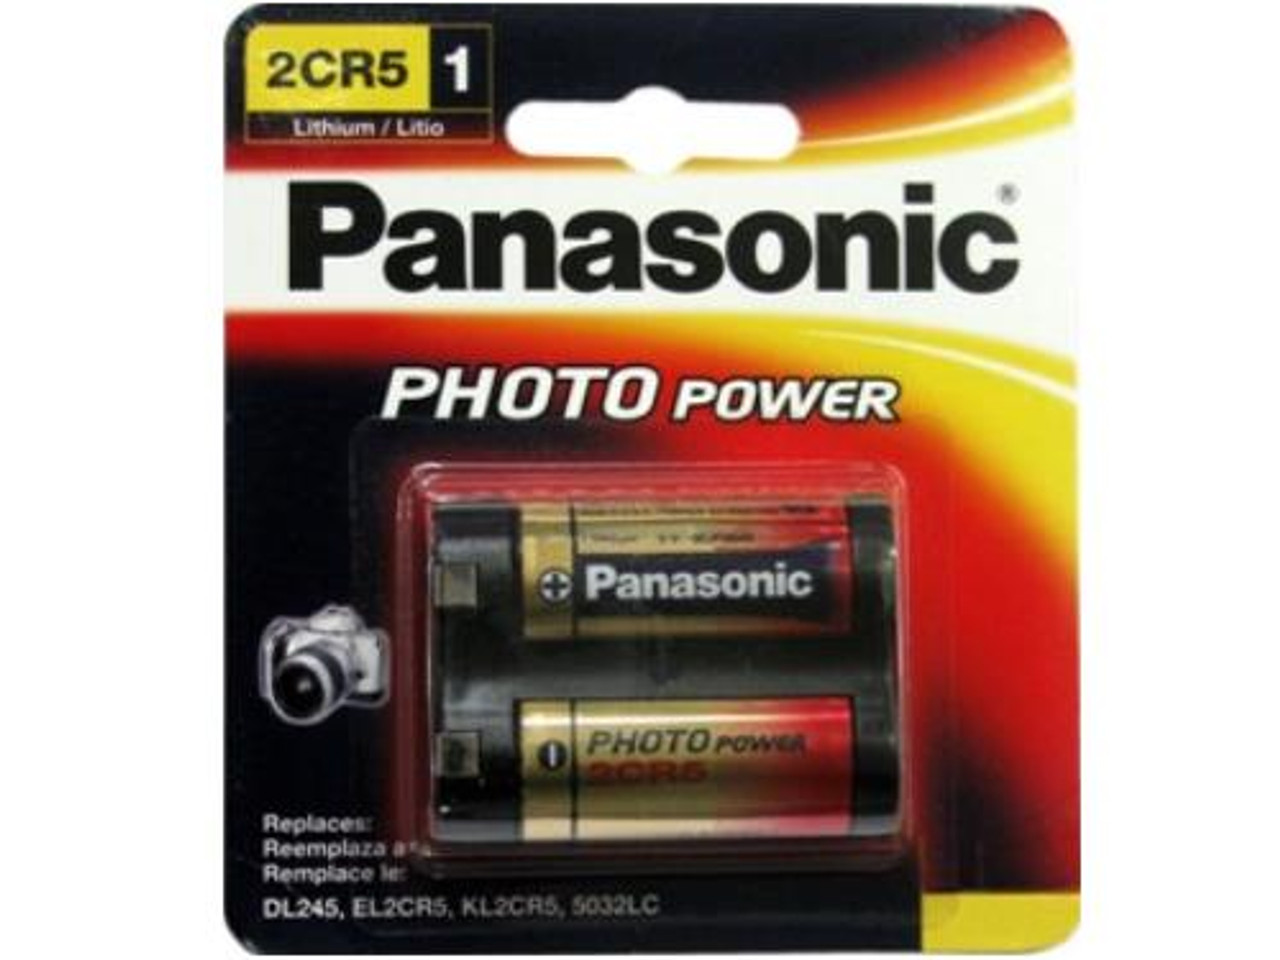 PHO0030 Interstate Battery Replacement 6V for Camera - Photo